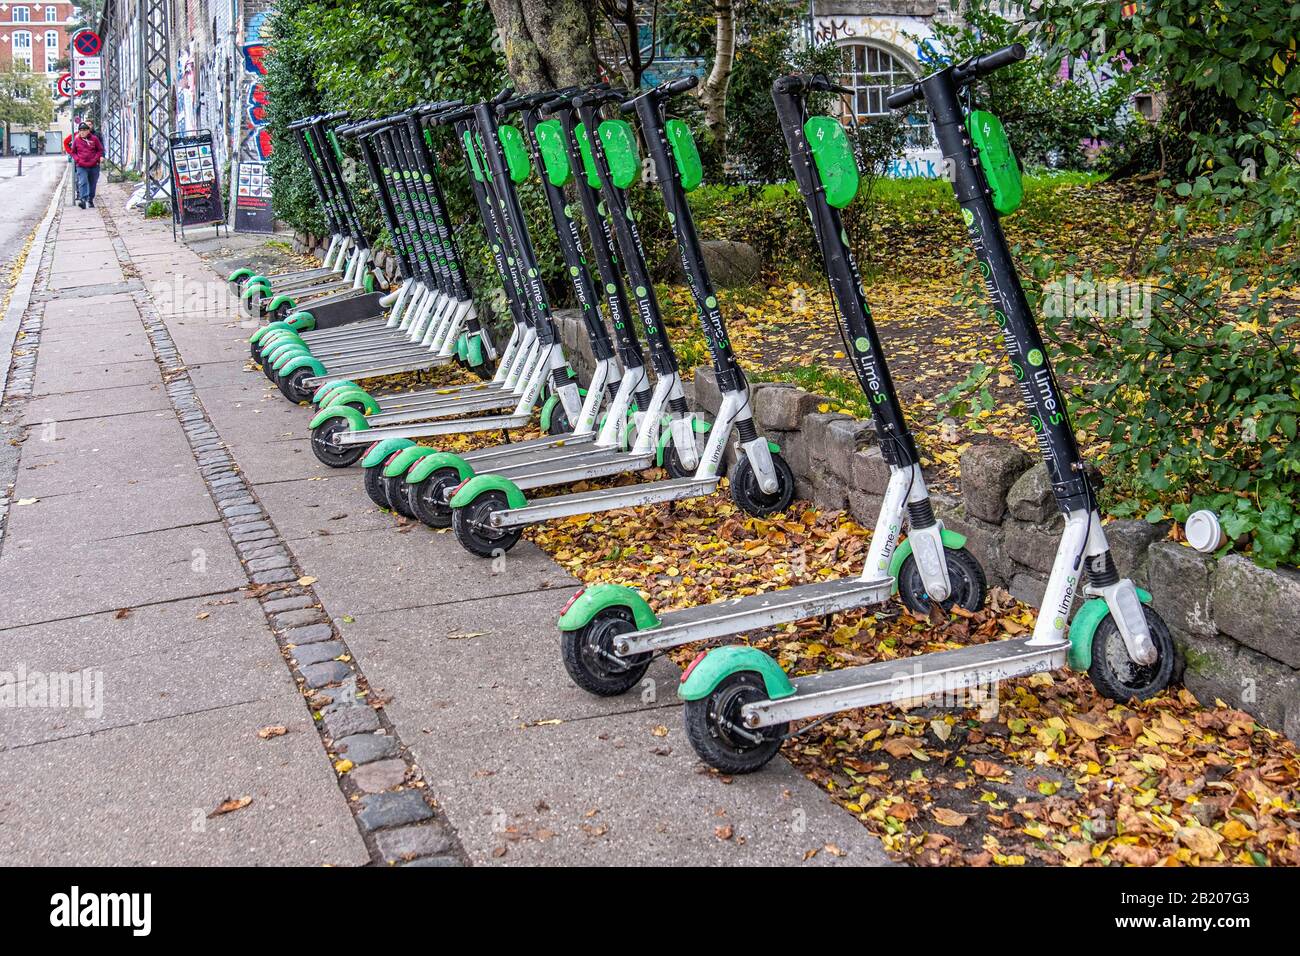 Row of Lime Rental E-scooters parked in Prensessegade street, Christiana,  Copenhagen Stock Photo - Alamy